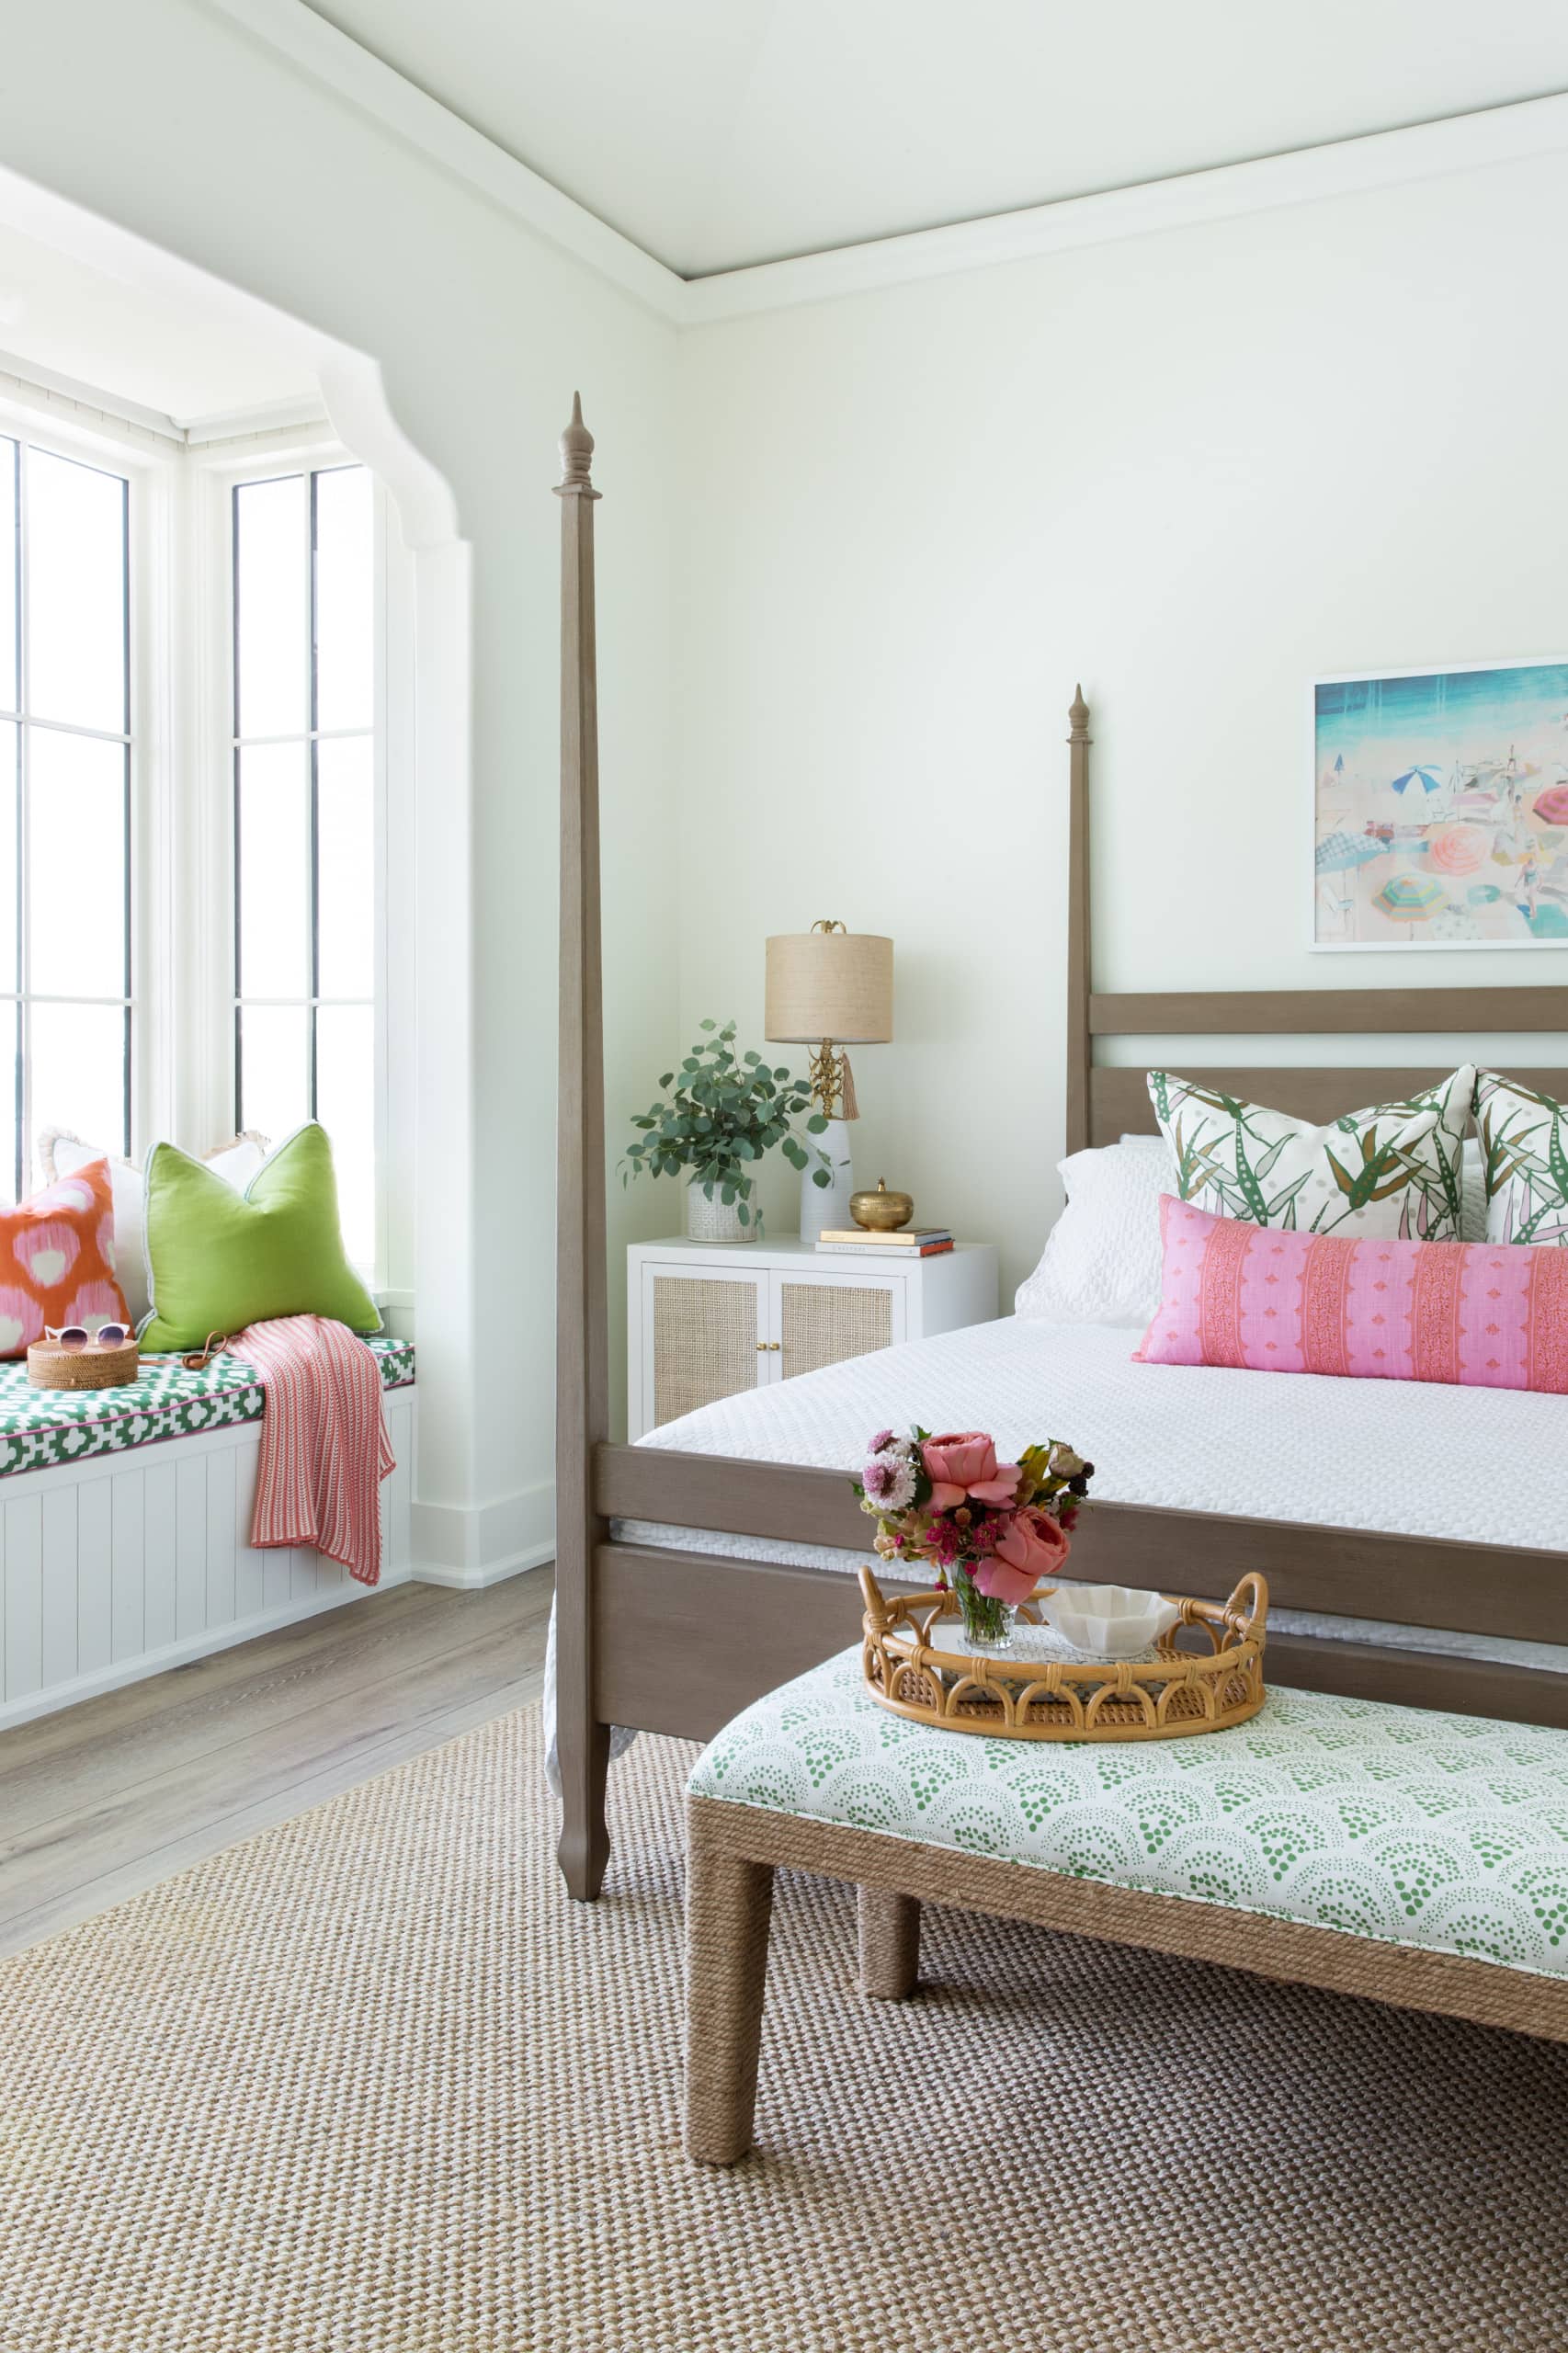 bedroom in coastal inspired decor featuring pink accents